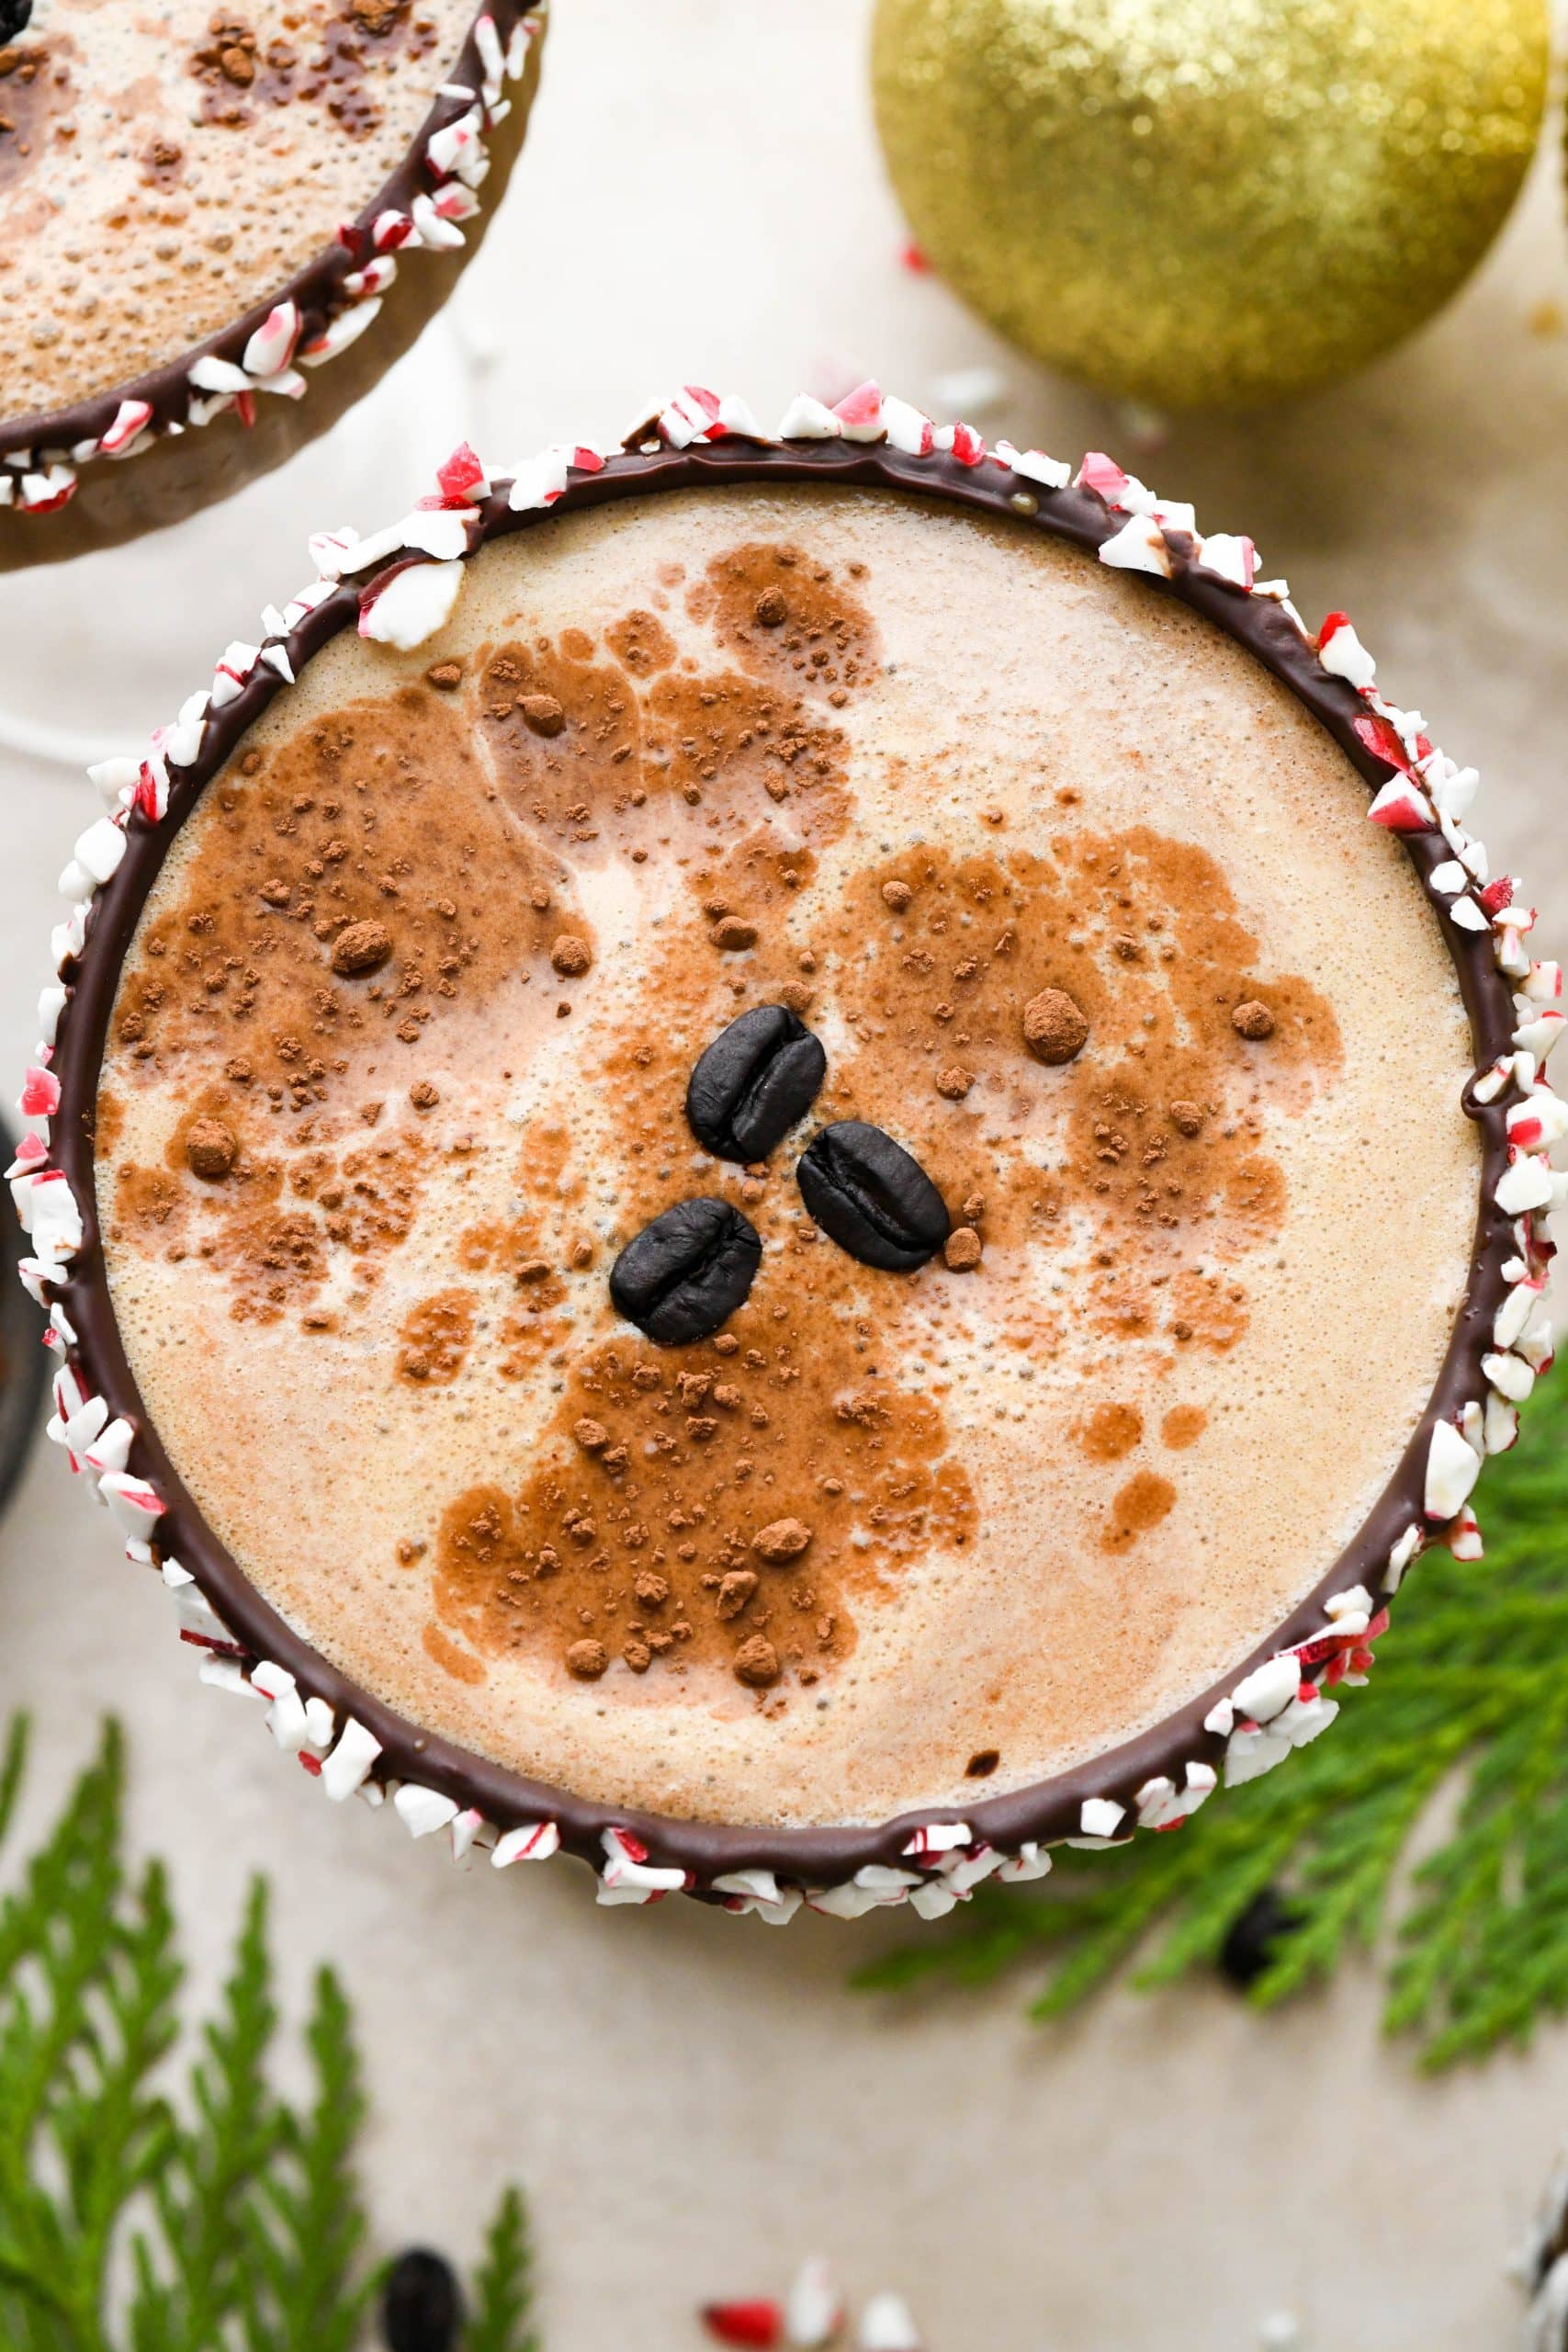 Overhead shot to show the top of a peppermint mocha espresso martini garnished with cocoa powder and coffee beans